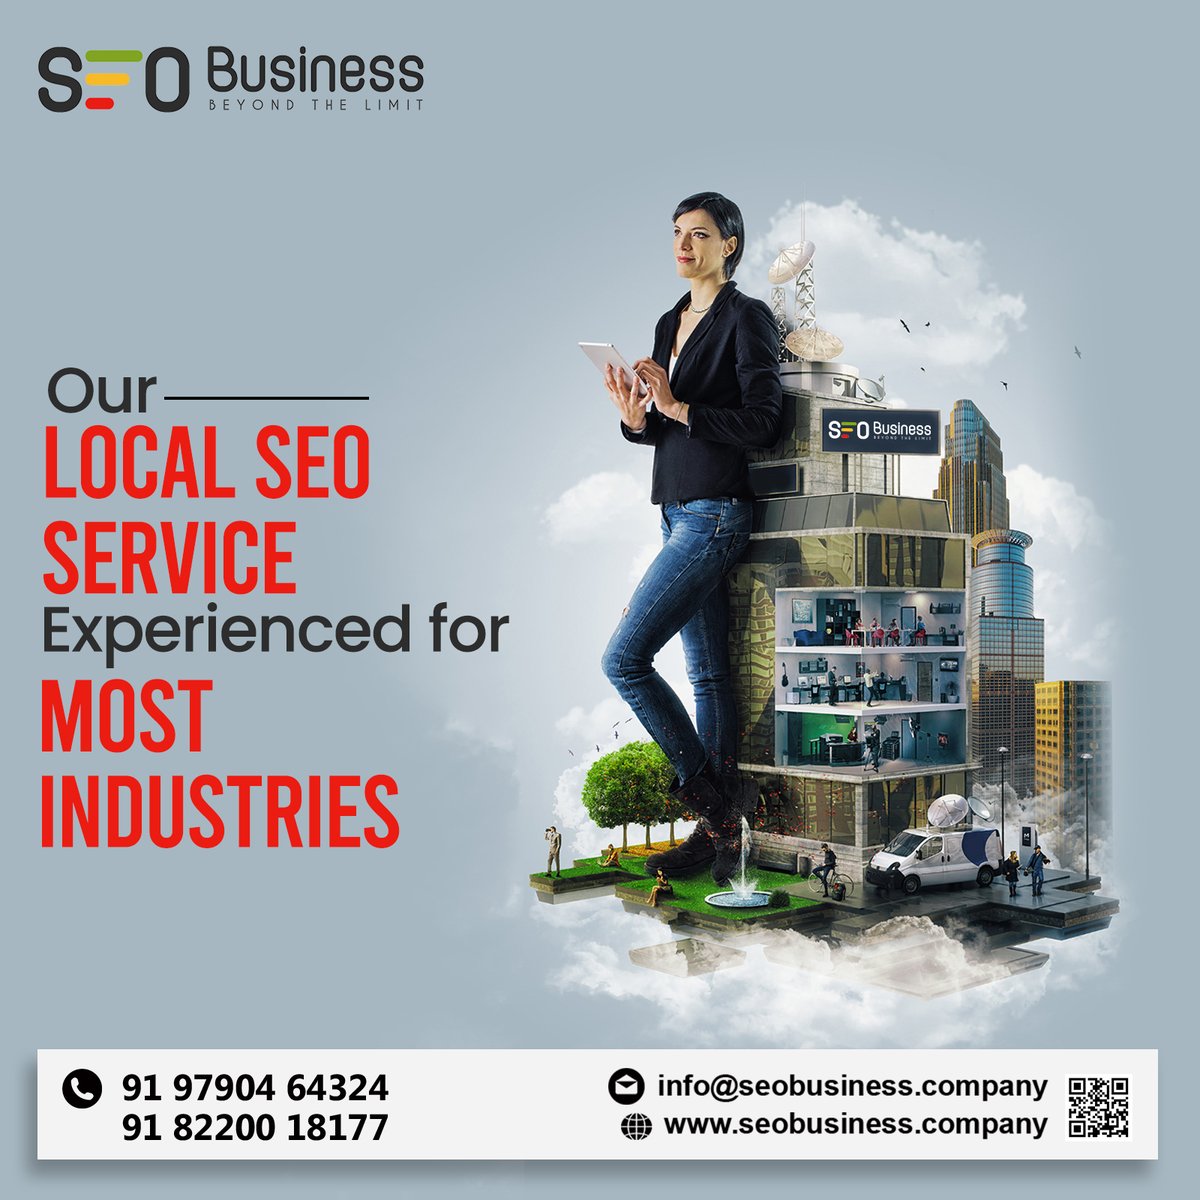 Experience Local SEO service to improve your business locally📈✨

#localseoagency #localseoexpert #localseocompany #localseoservices #localseomarketing #marketingdigital #marketingonline #marketingstrategy #localbusiness #Friday13th